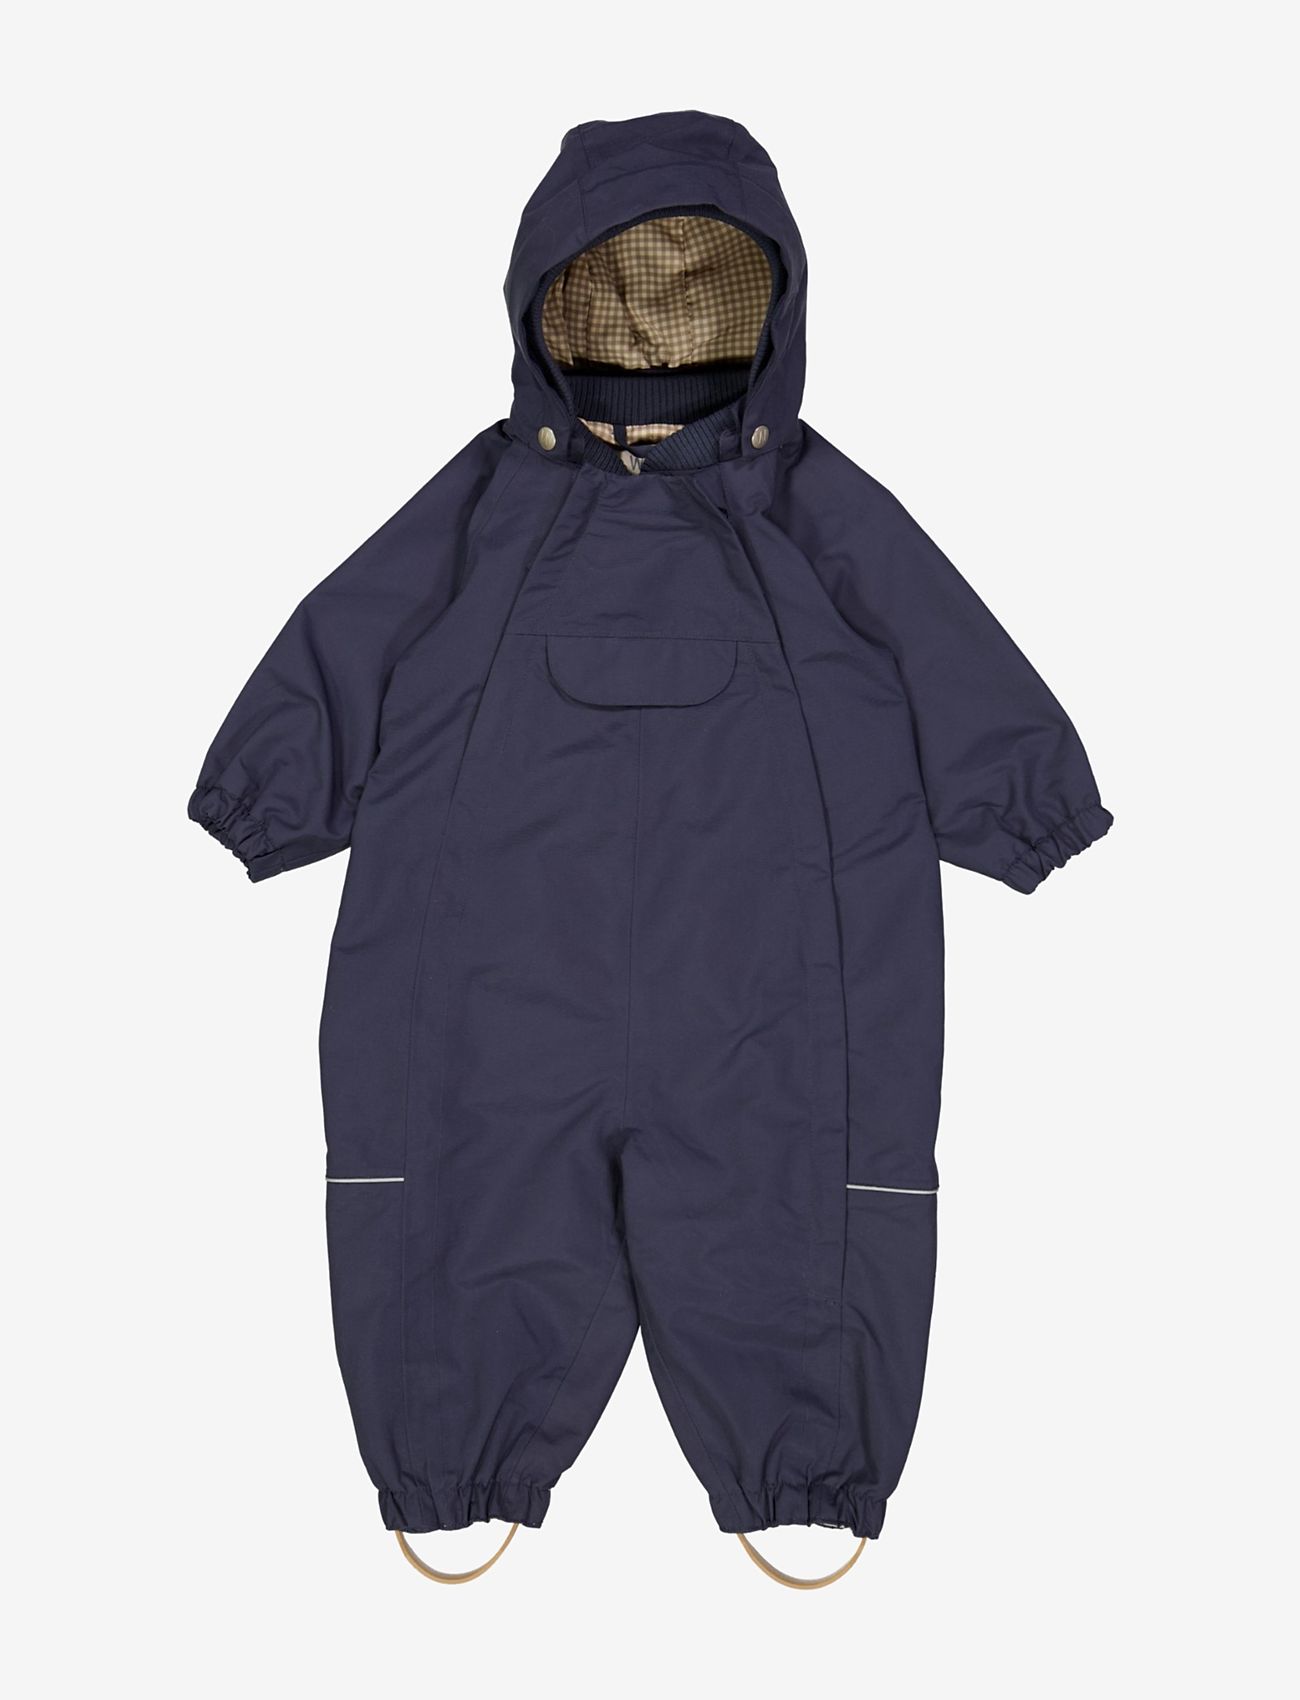 Wheat - Outdoor suit Olly Tech - regenoverall - midnight - 0